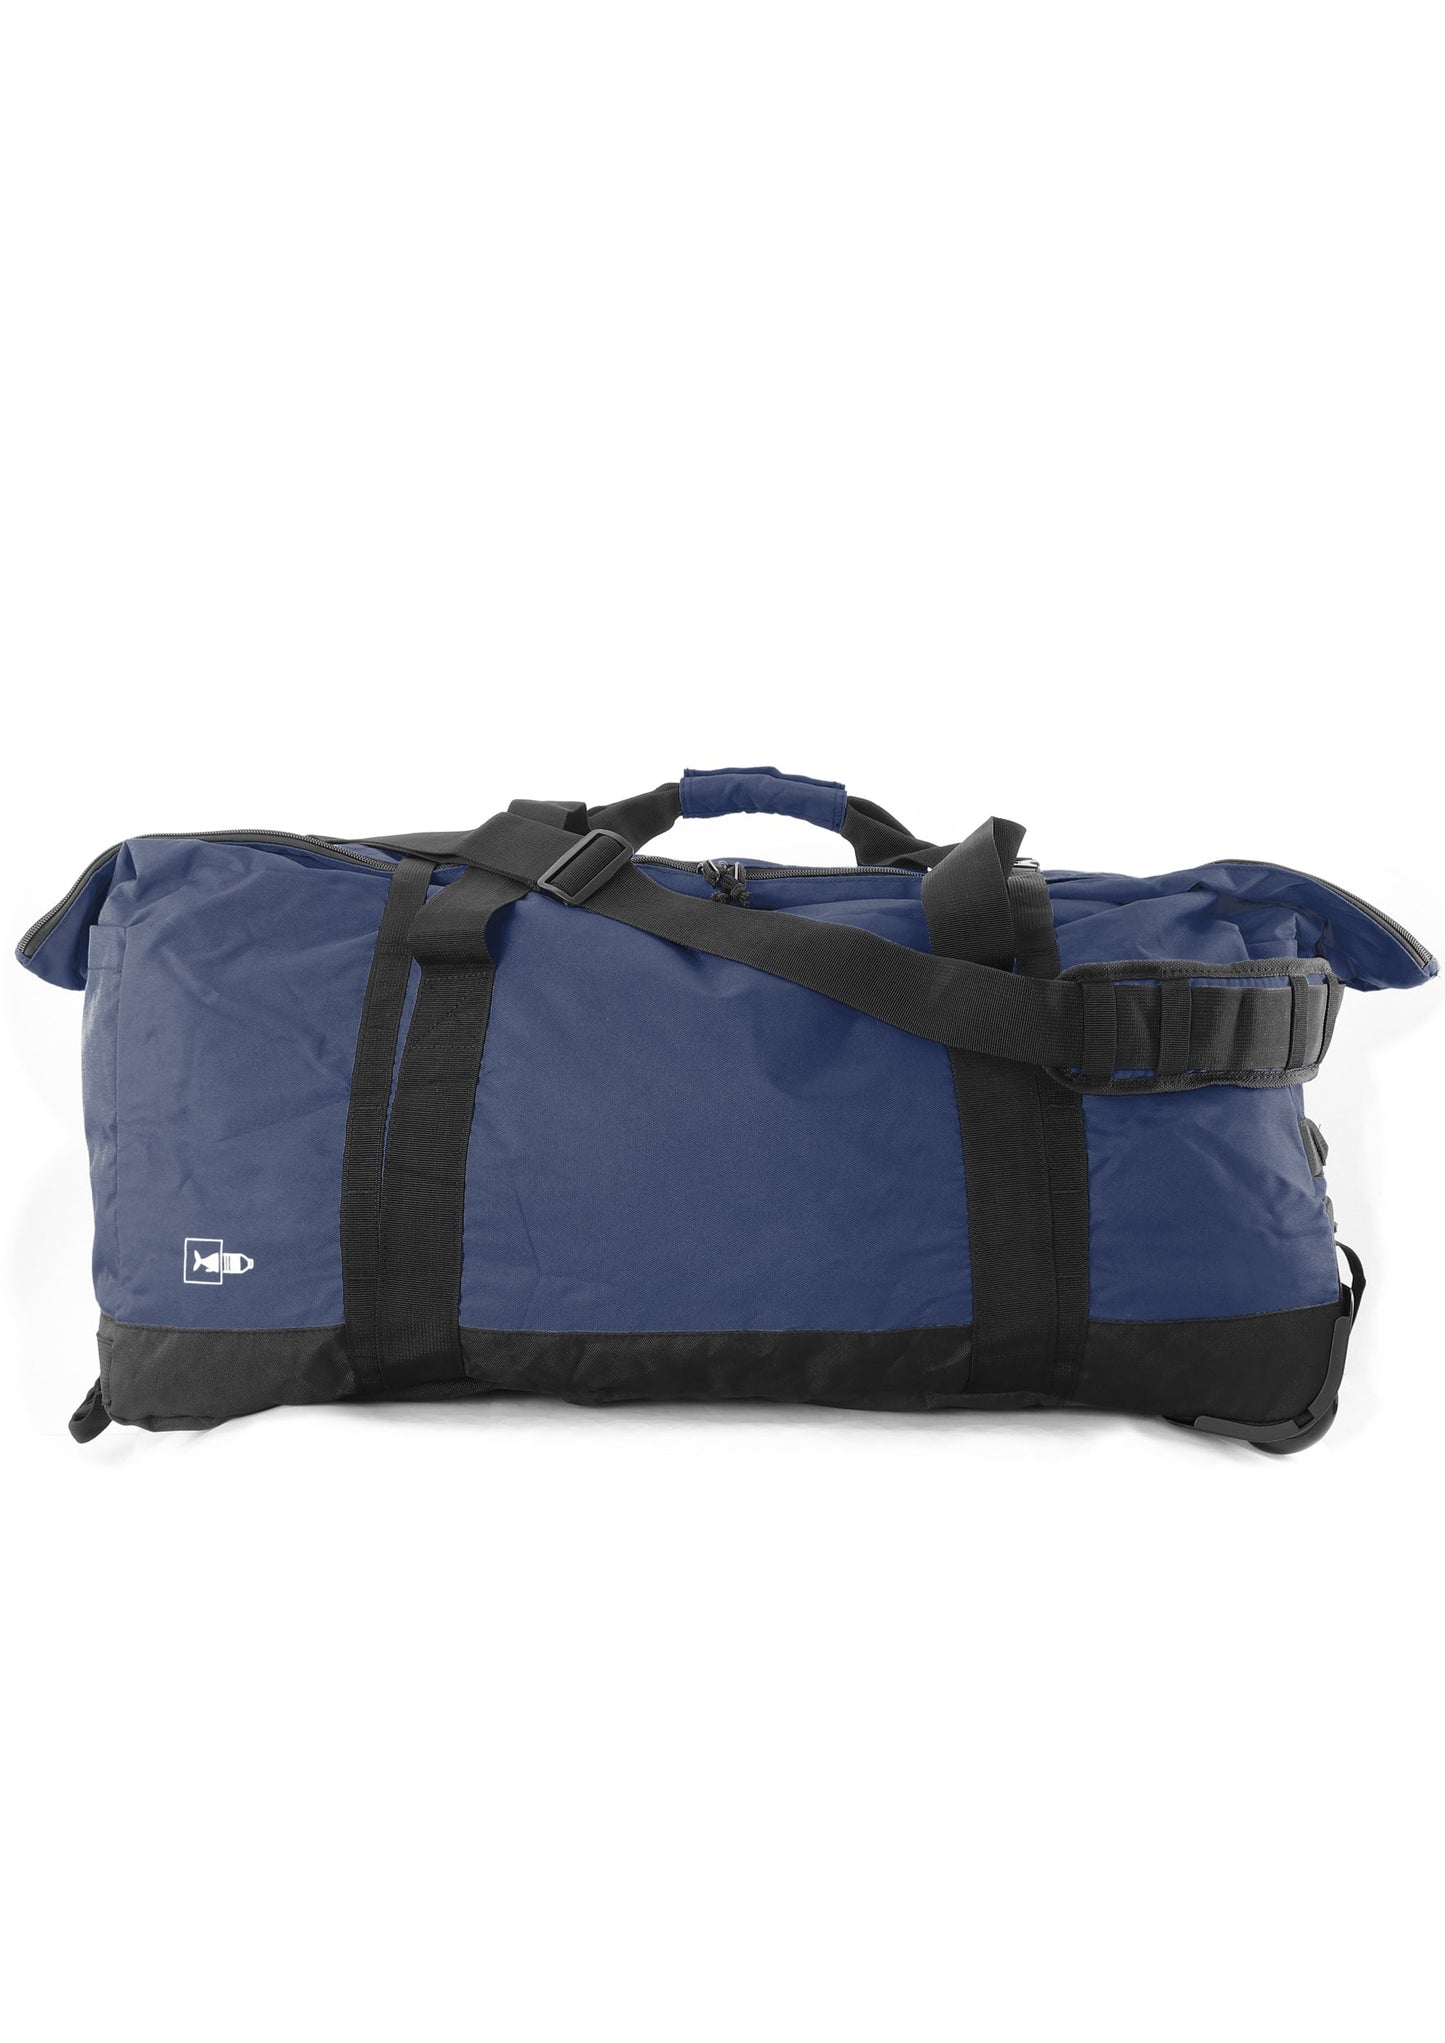 National Geographic Pathway L - Achterkant Blauw wieltas | luggage4u.be